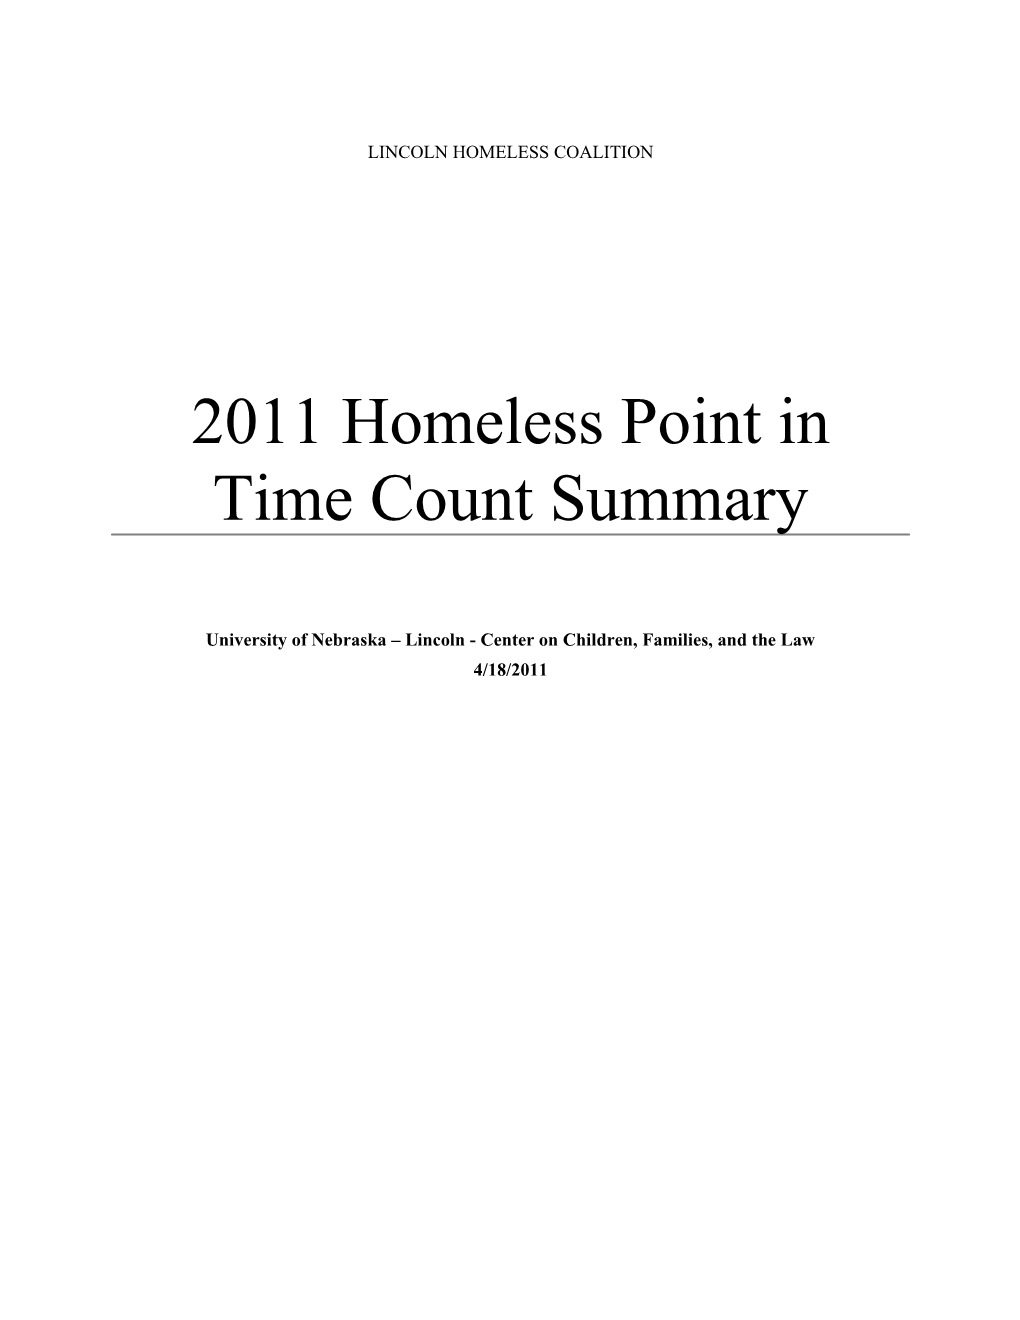 Lincoln 2011 Homeless Point in Time Count